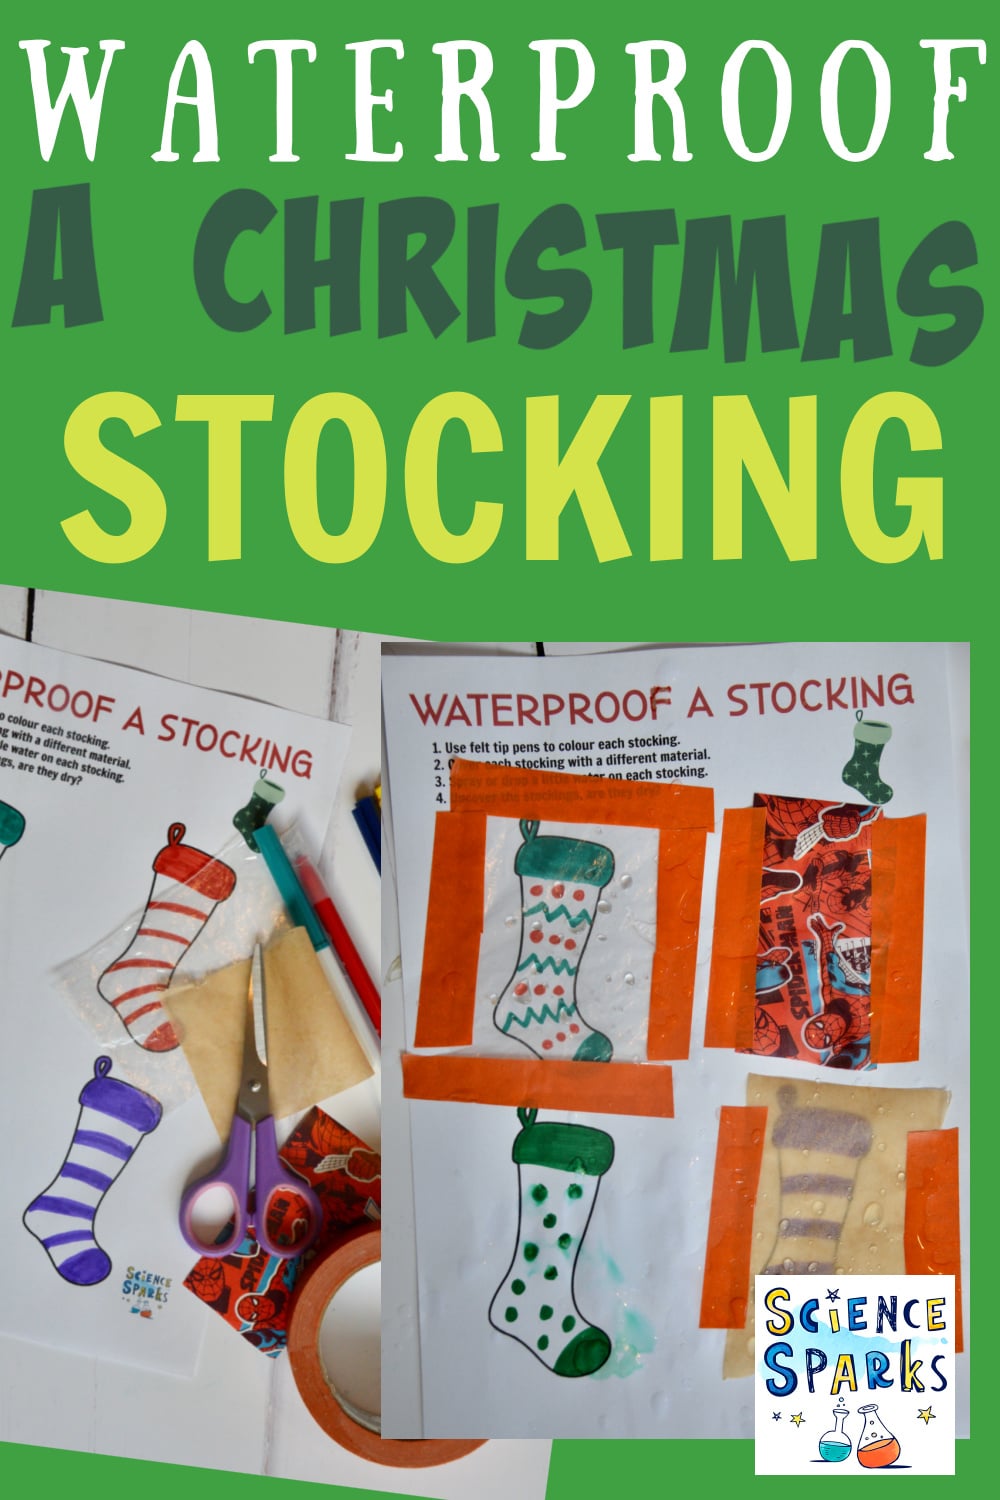 4 images of a Christmas stockings on an A4 sheet of paper for a waterproofing experiment. Each image is covered with a different type of material which then has water sprinkled on it.